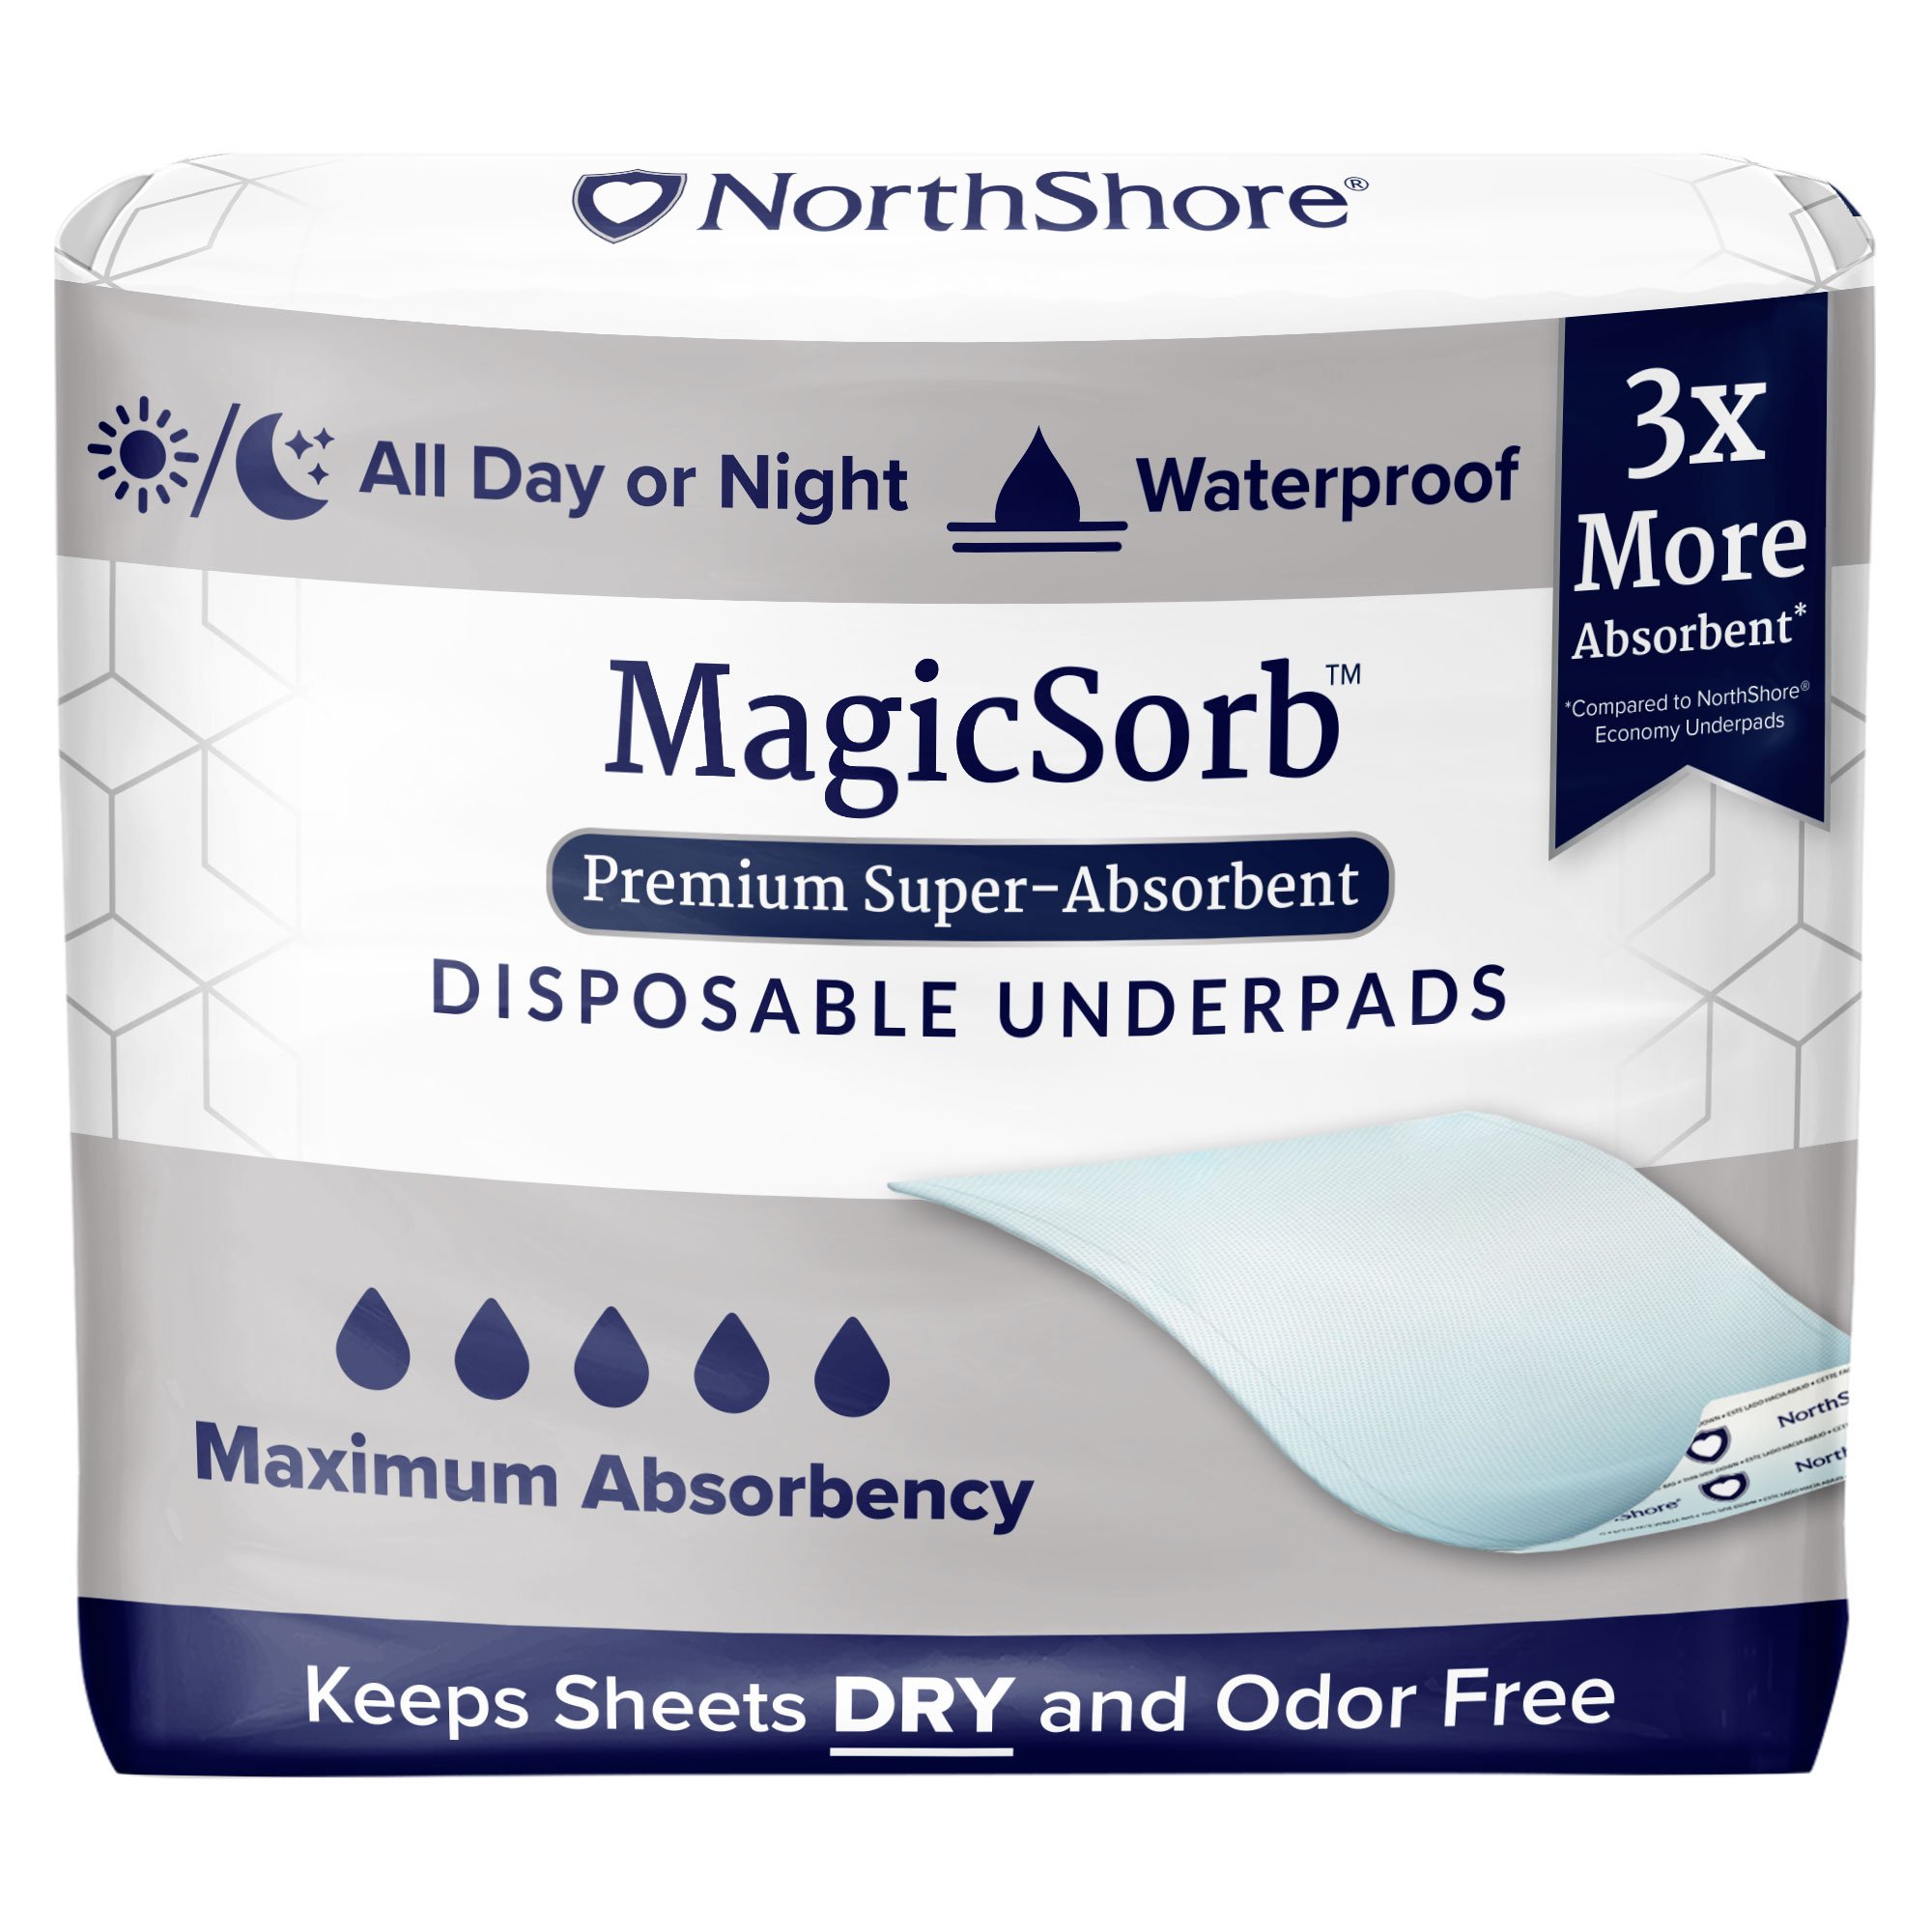 NorthShore MagicSorb Air Disposable Underpads